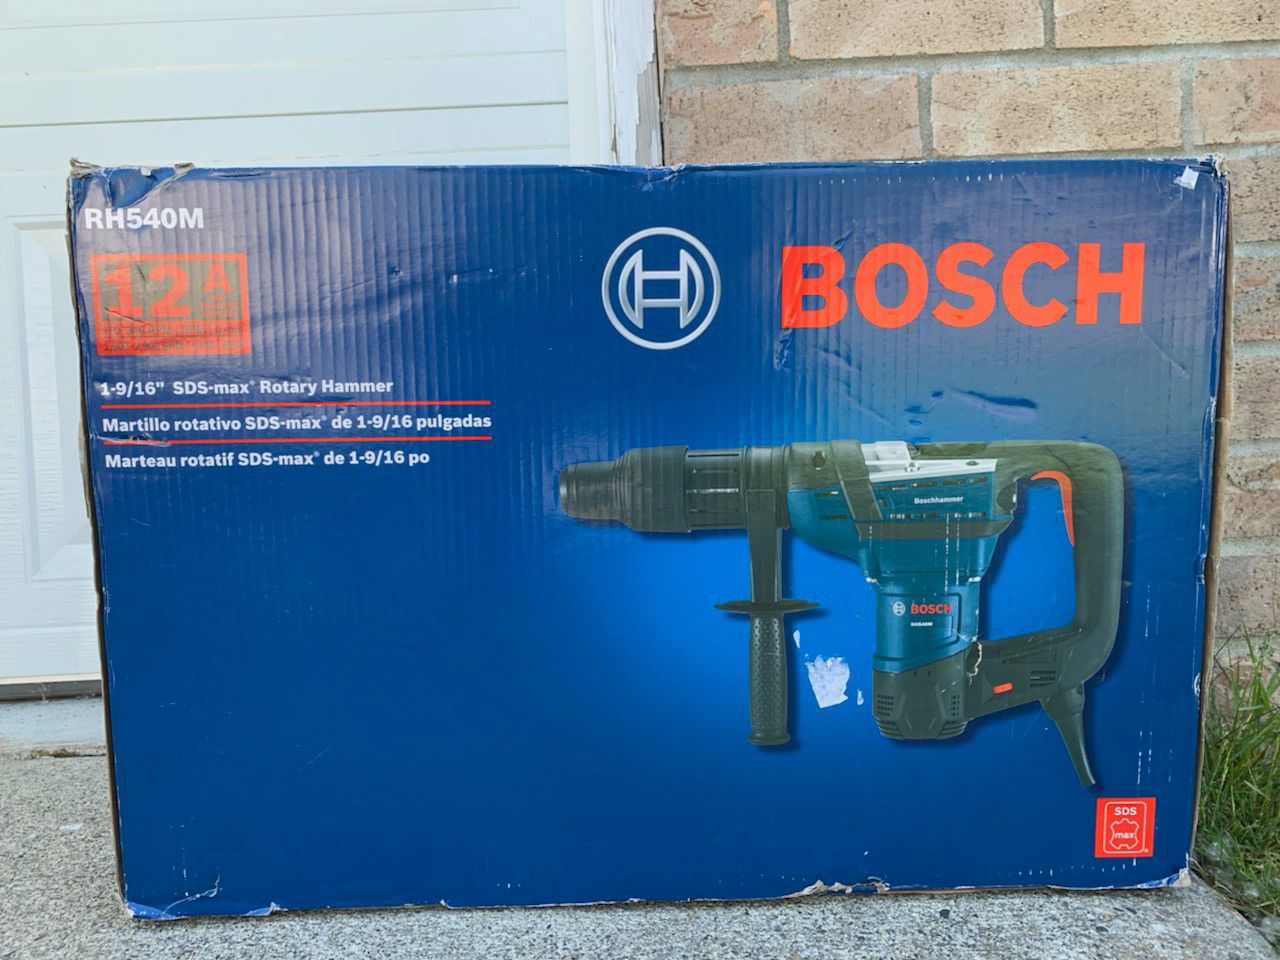 NEW Bosch RH540M 12 Amp 1-9/16 in. Corded Variable Speed SDS-Max Combination Concrete/Masonry Rotary Hammer Drill with Carrying Case